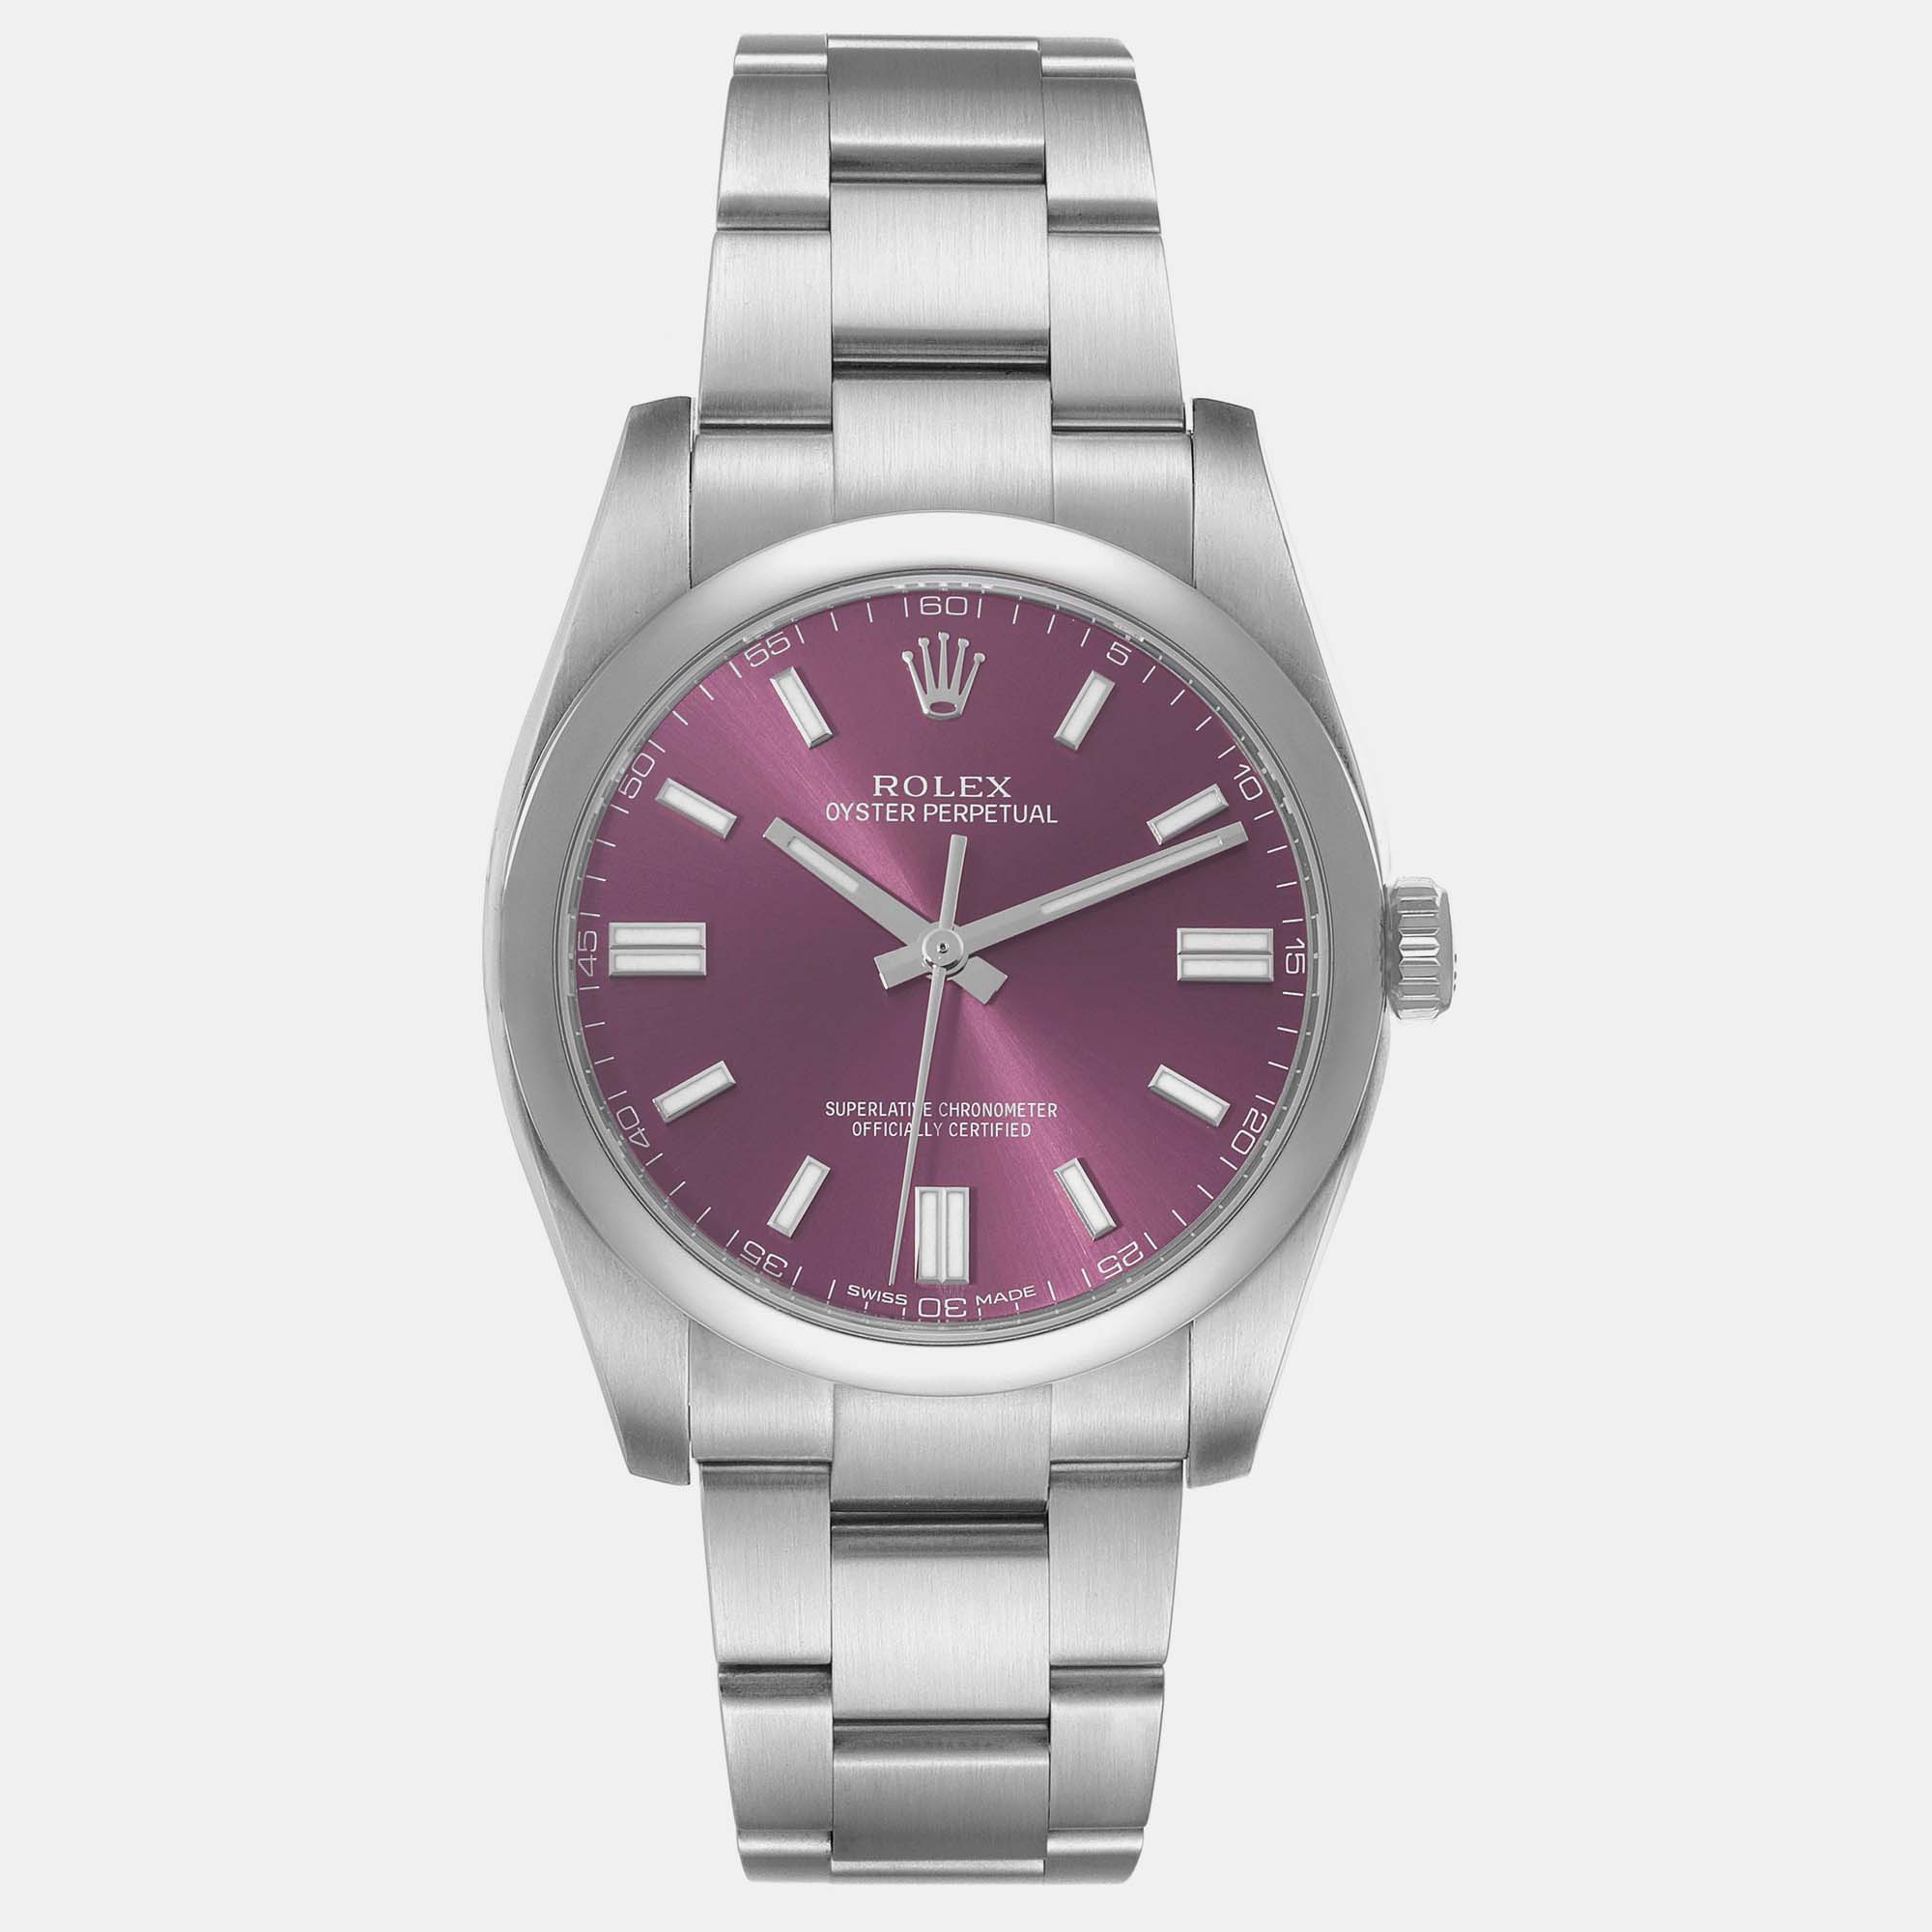 Rolex oyster perpetual red grape dial steel men's watch 36 mm